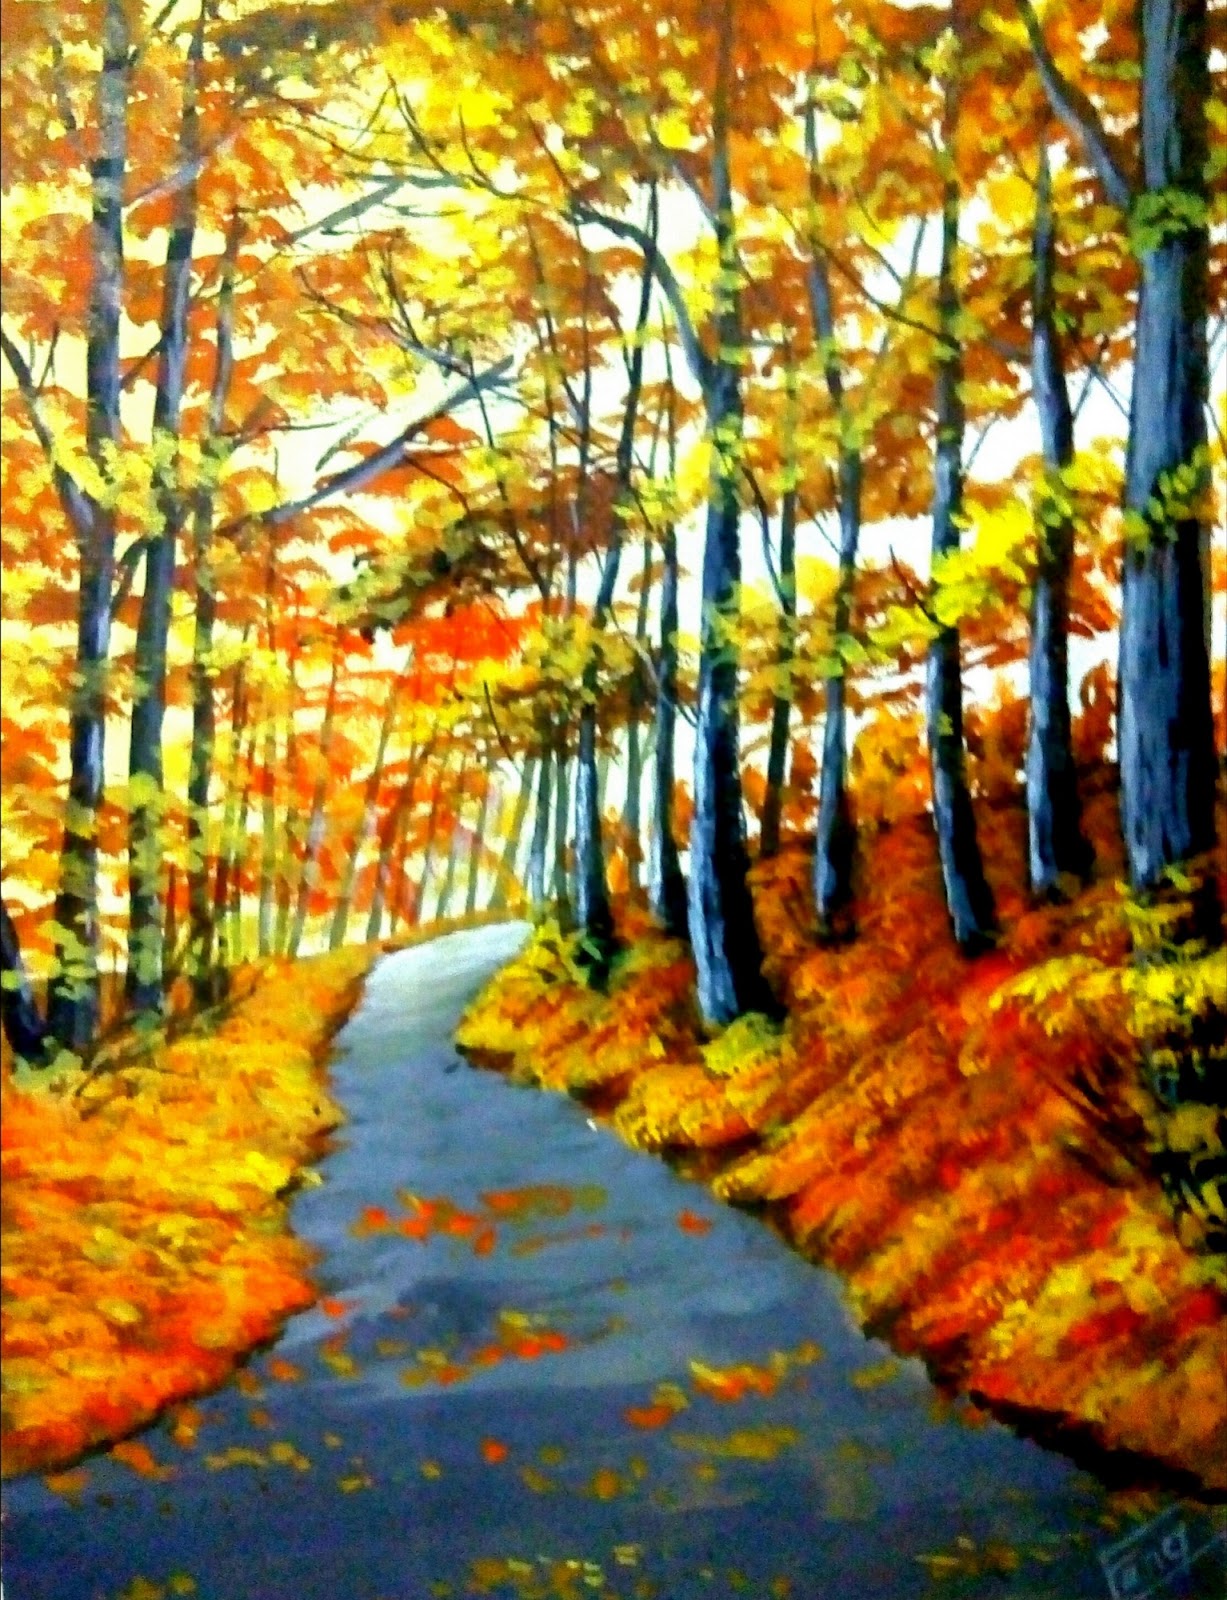 Acrylic Painting Tutorial Step By Step / Easy Forest Painting / Autumn